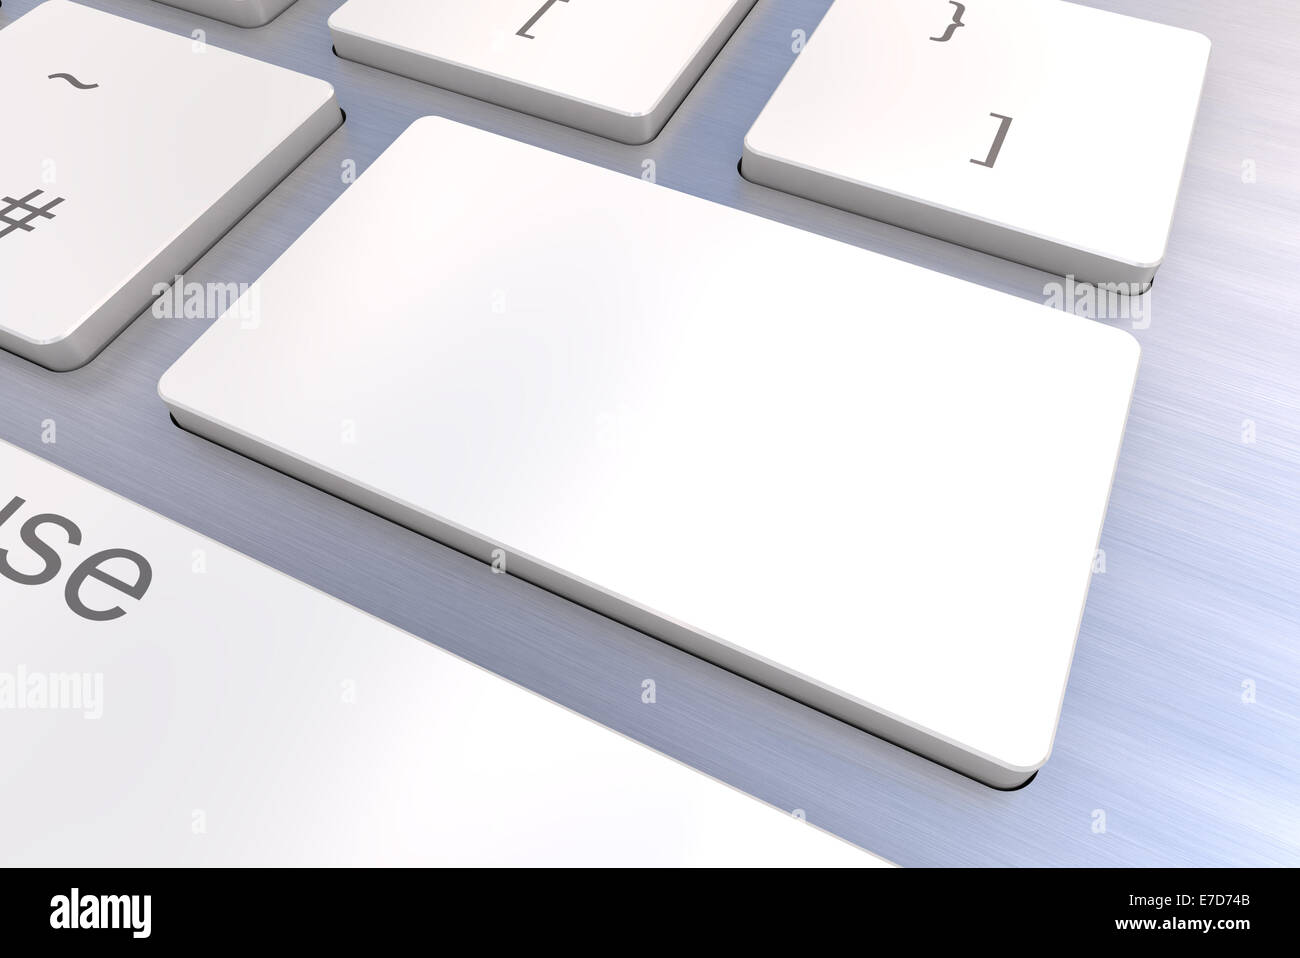 A Colourful 3d Rendered Illustration showing a Blank White Keyboard concept on a Computer Keyboard Stock Photo